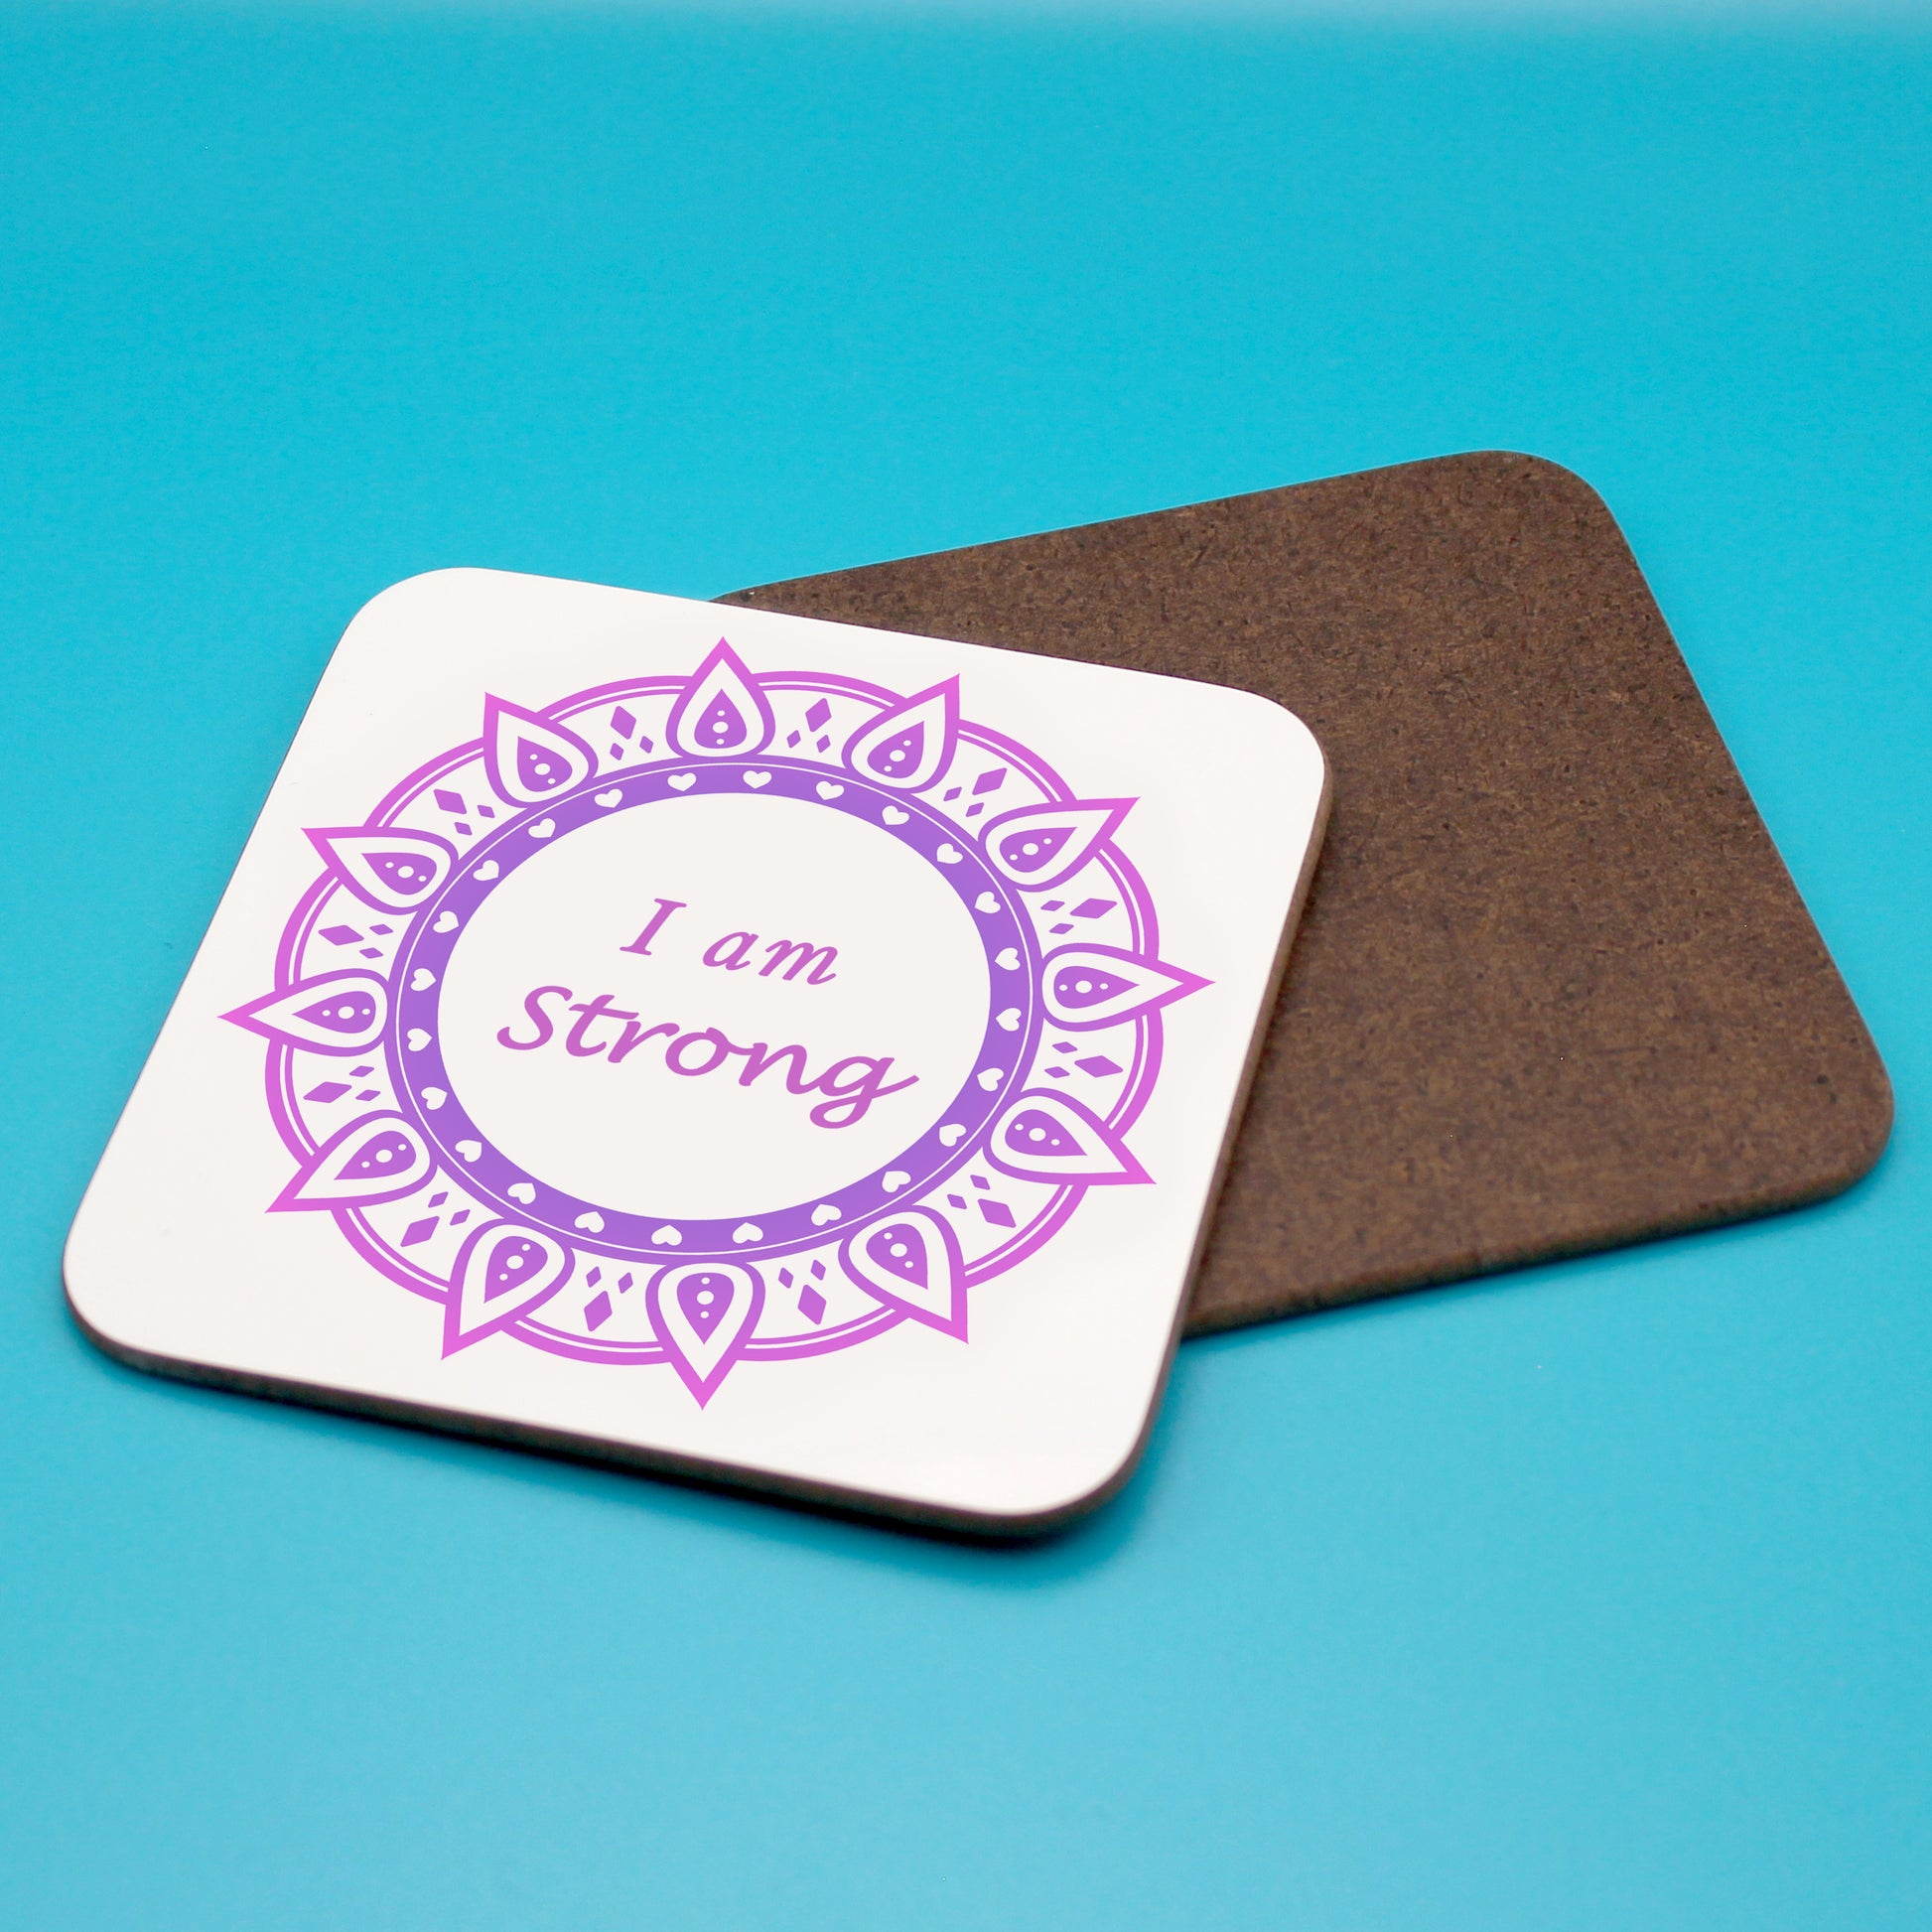 White positive affirmation coaster with two-tone purple mandala design. Daily affirmation reads I am Strong. Coaster underneath shows wood backing